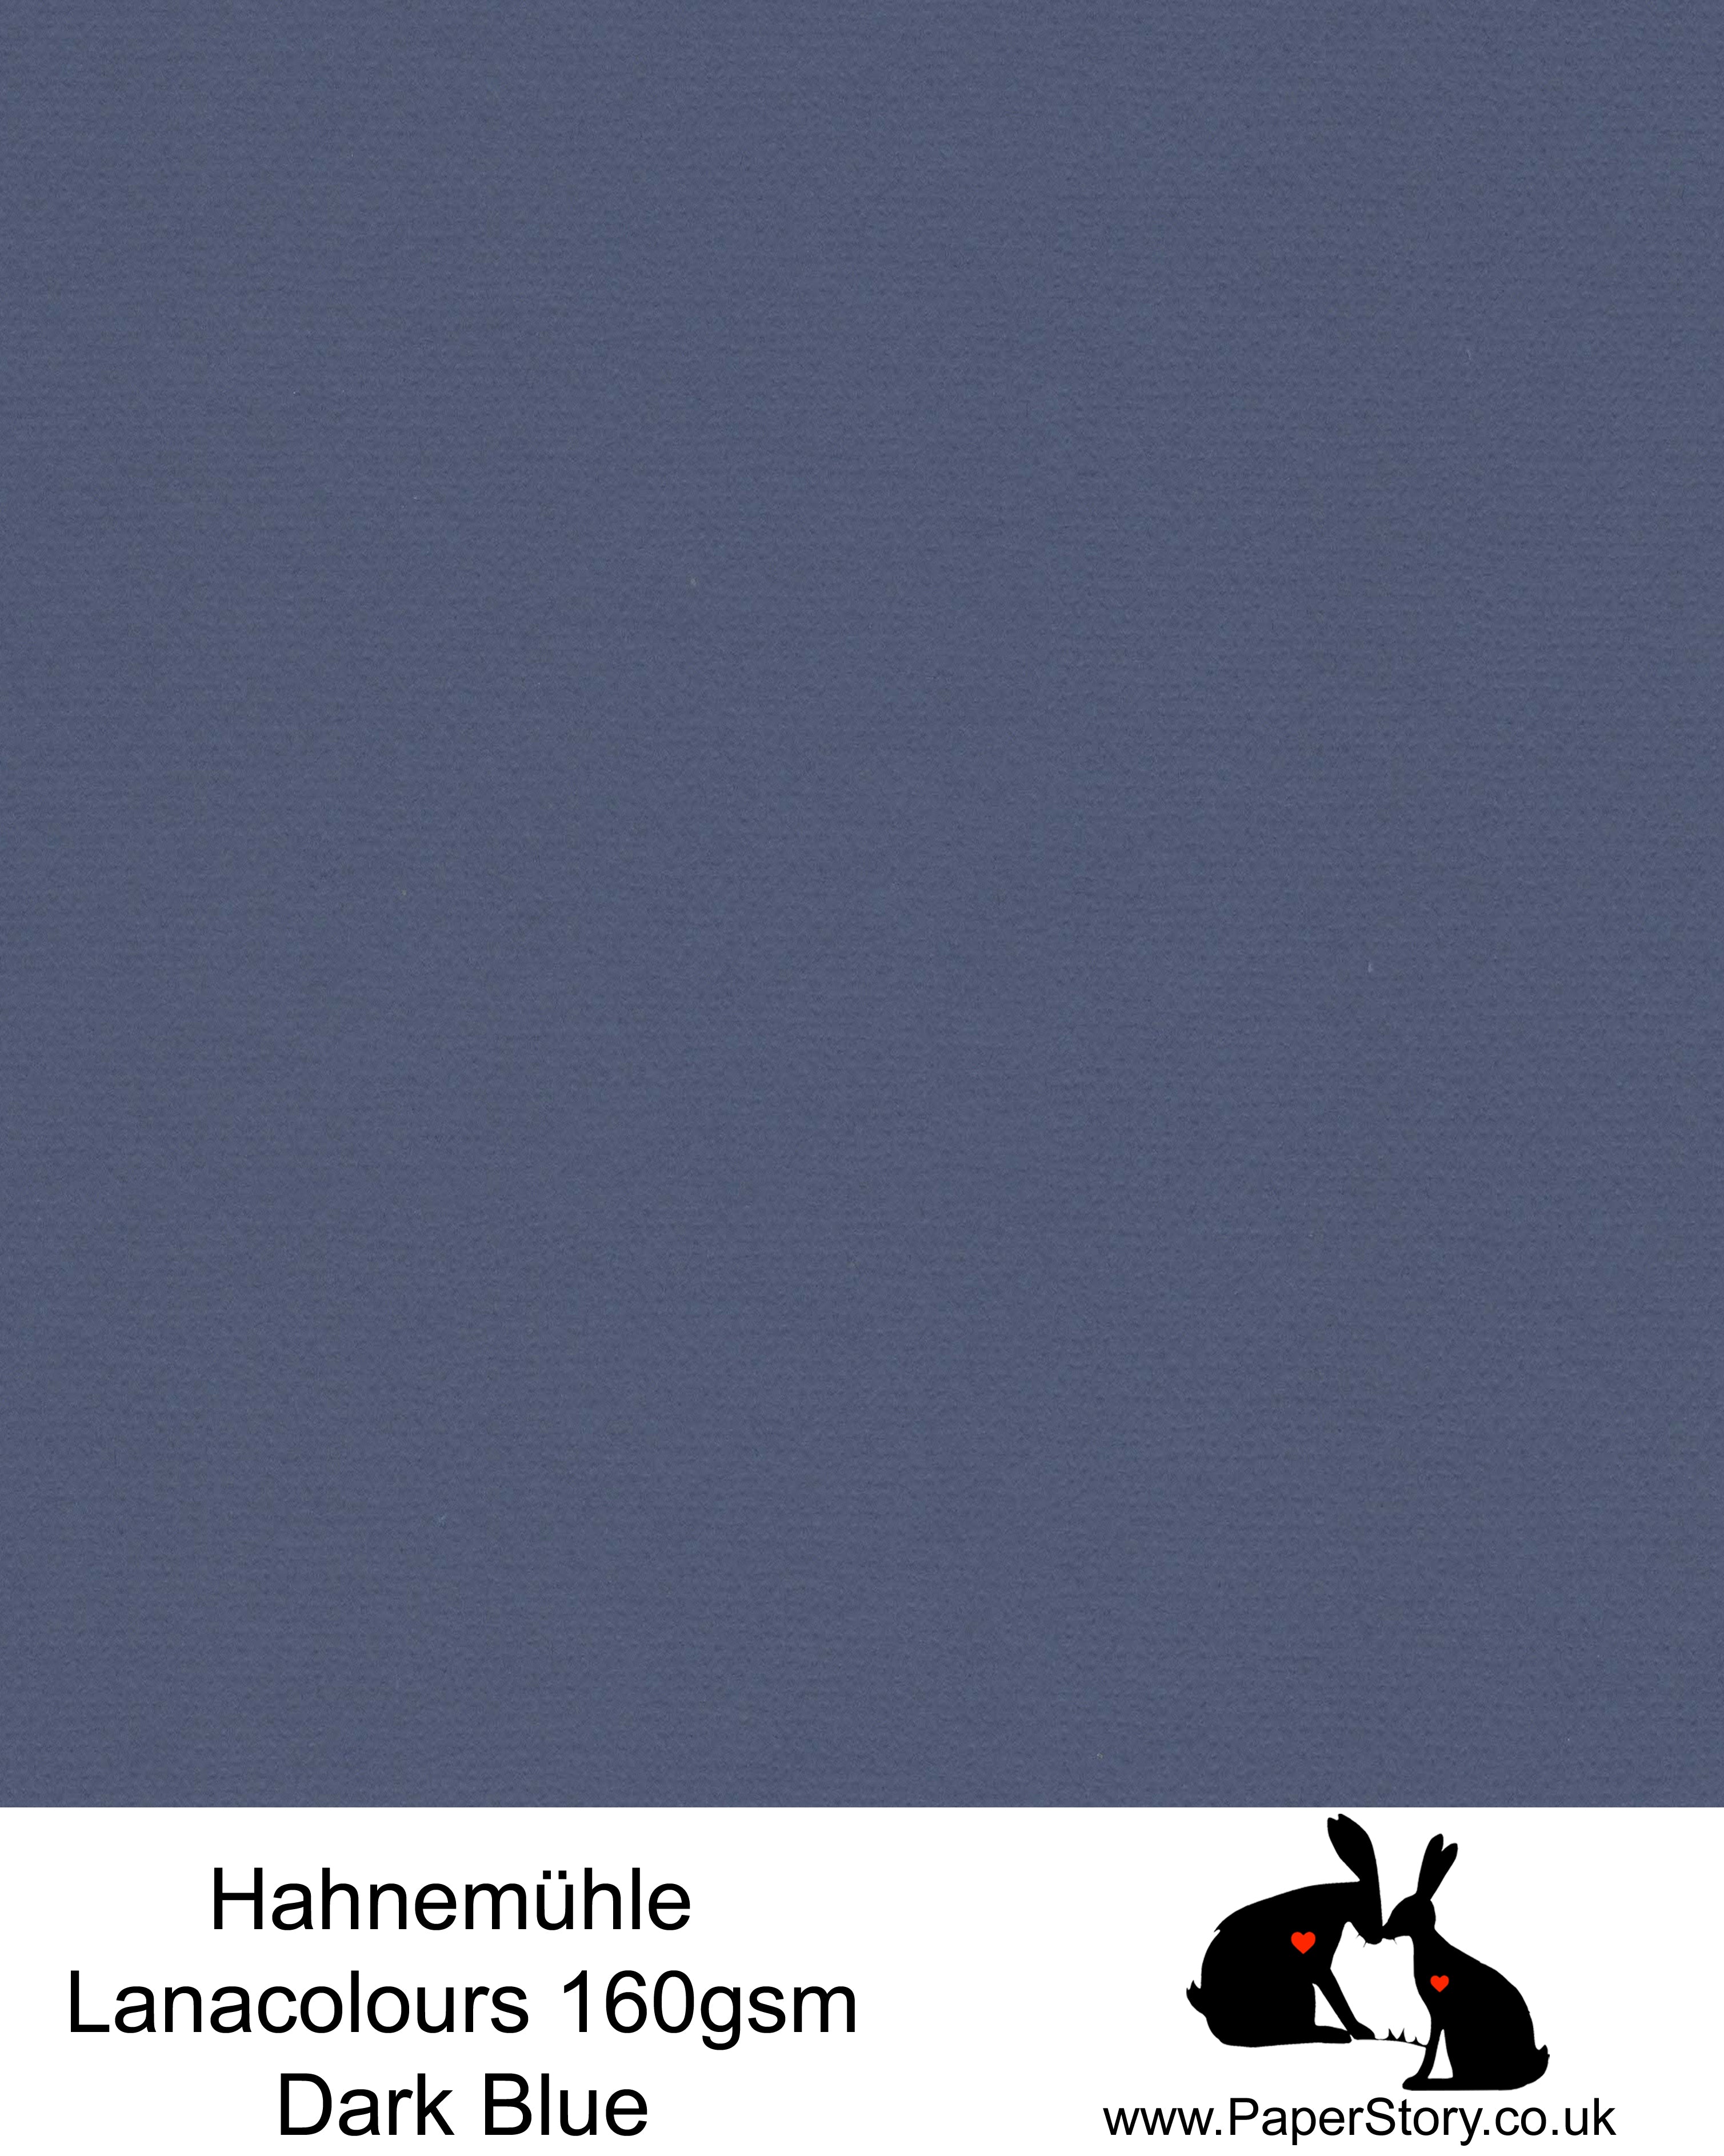 Hahnemühle Lana Colours Dark Blue, night sky pastel hammered paper 160 gsm. Artist Premium Pastel and Papercutting Papers 160 gsm often described as hammered paper.